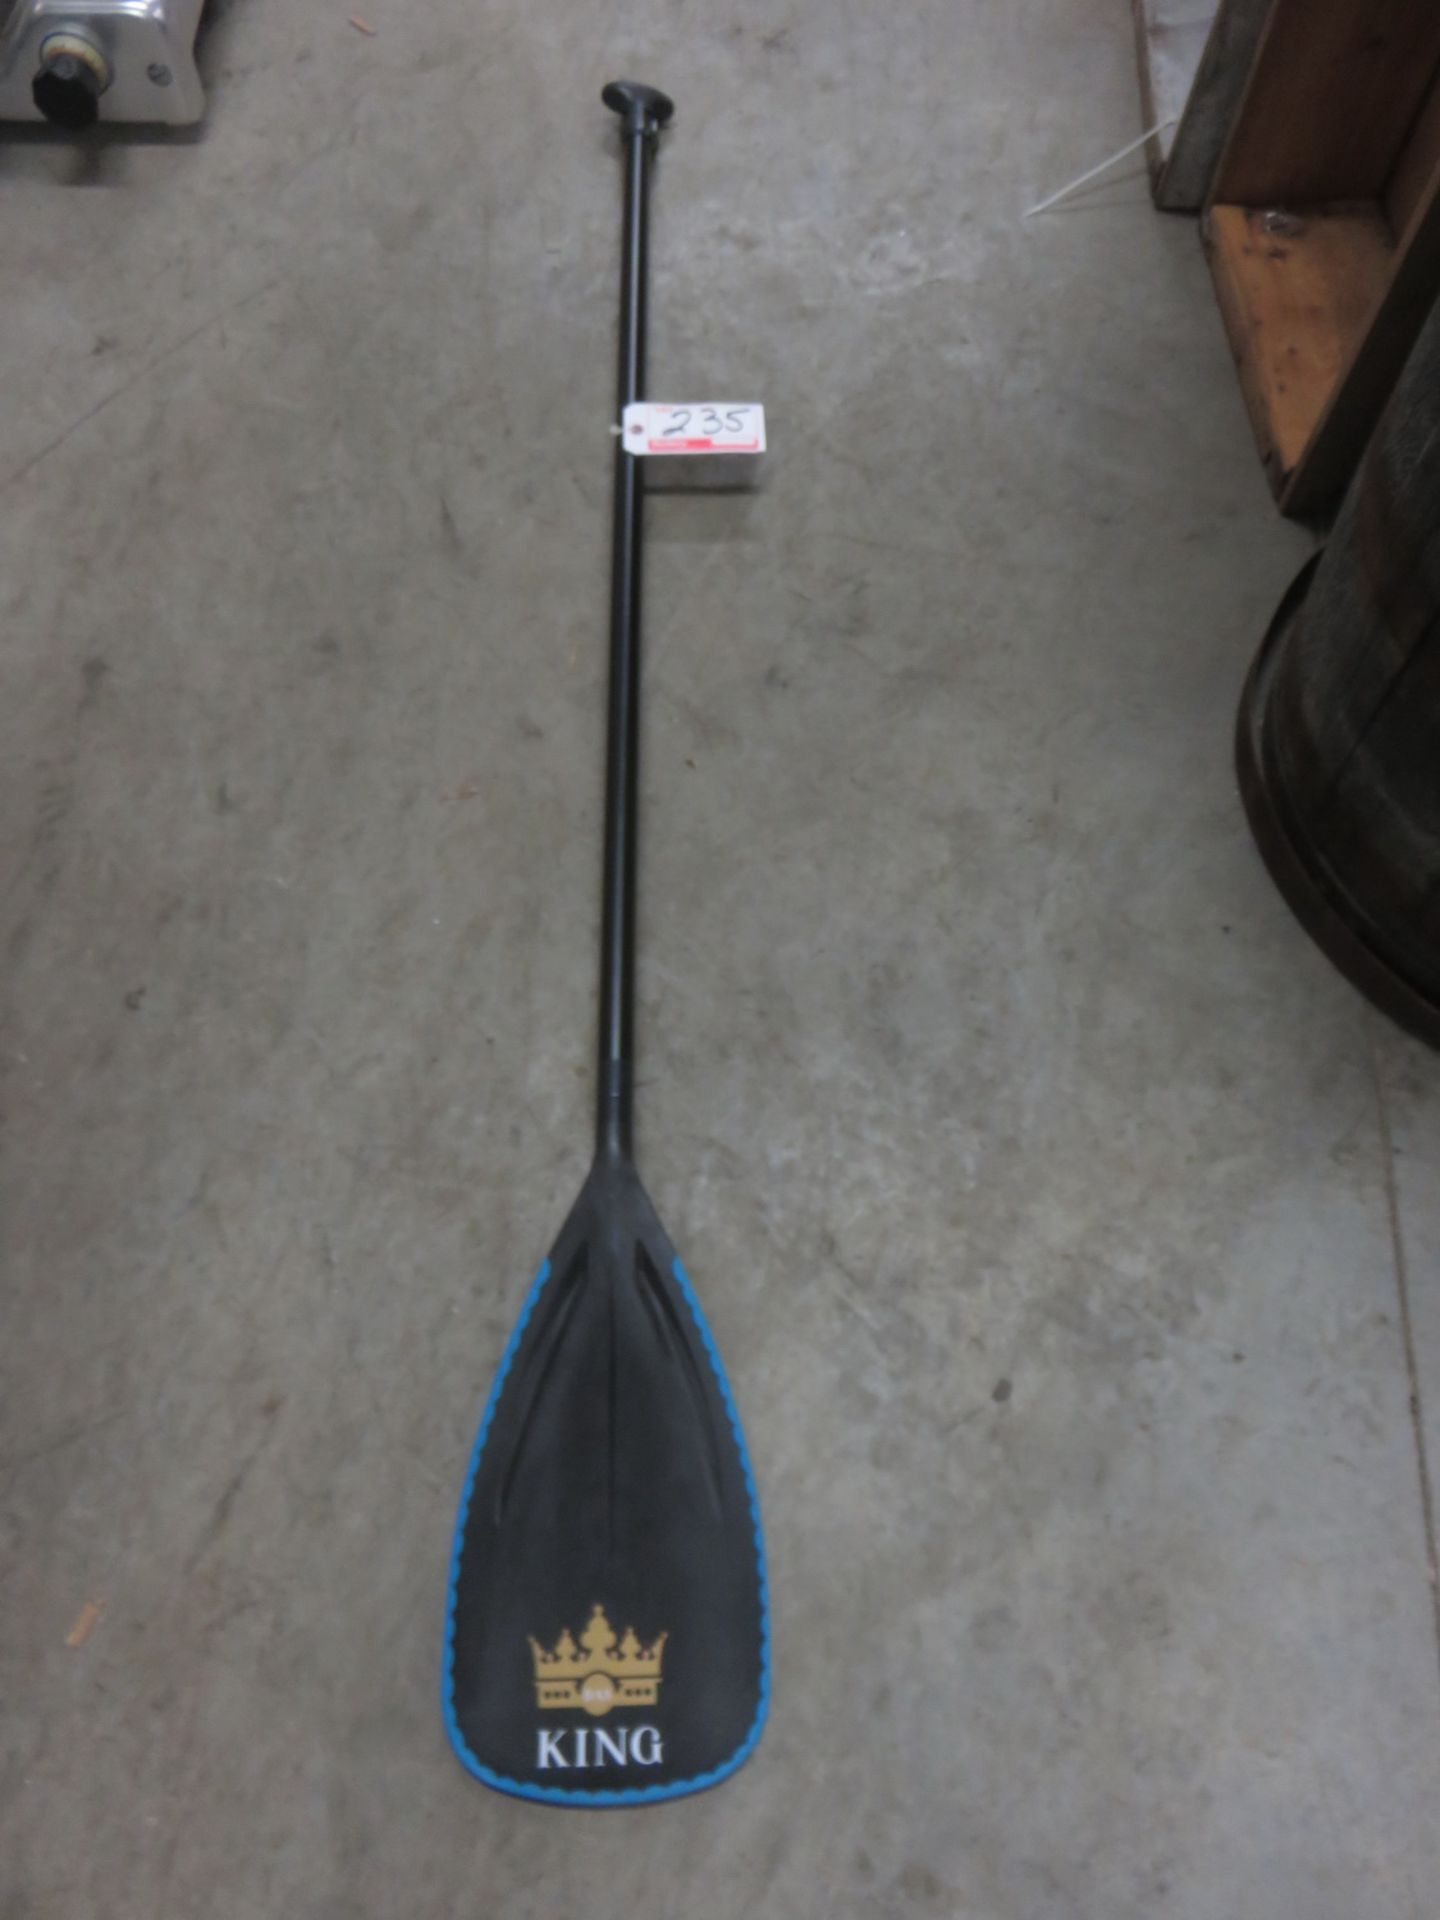 NEW - DAS KING APPROX. 11'L PADDLE BOARD C/W PADDLE, SET OF FINS, & TRAVEL CARRYING BAG - Image 2 of 2